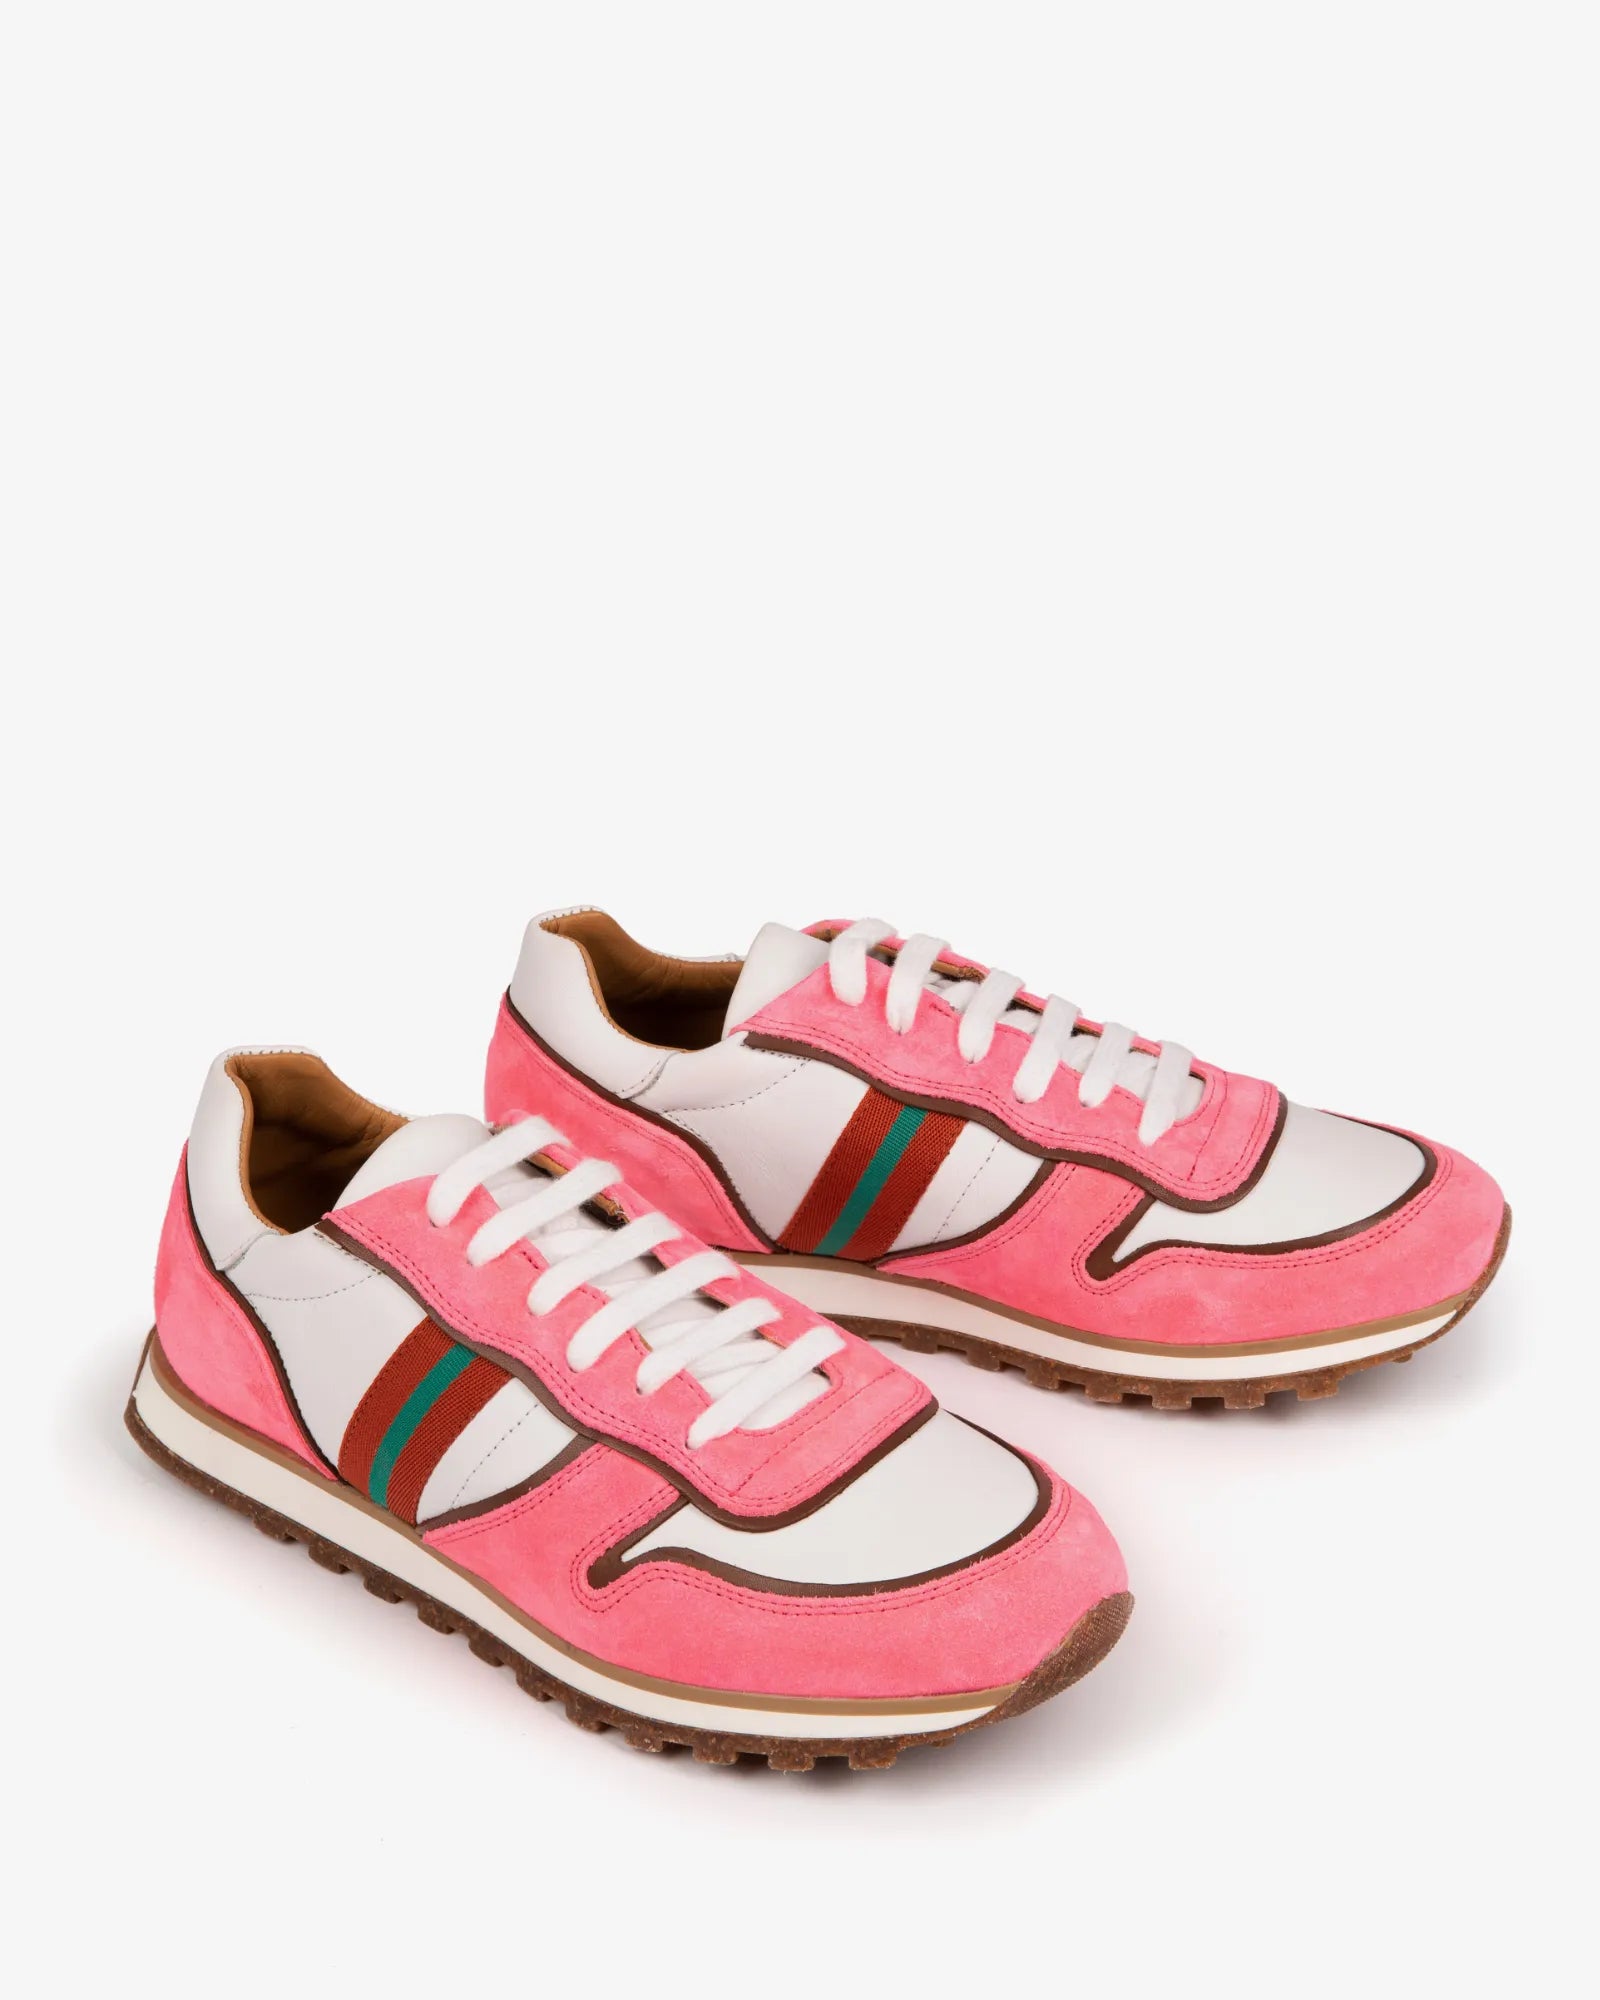 Studio Neon Suede Leather Trainers - Pink